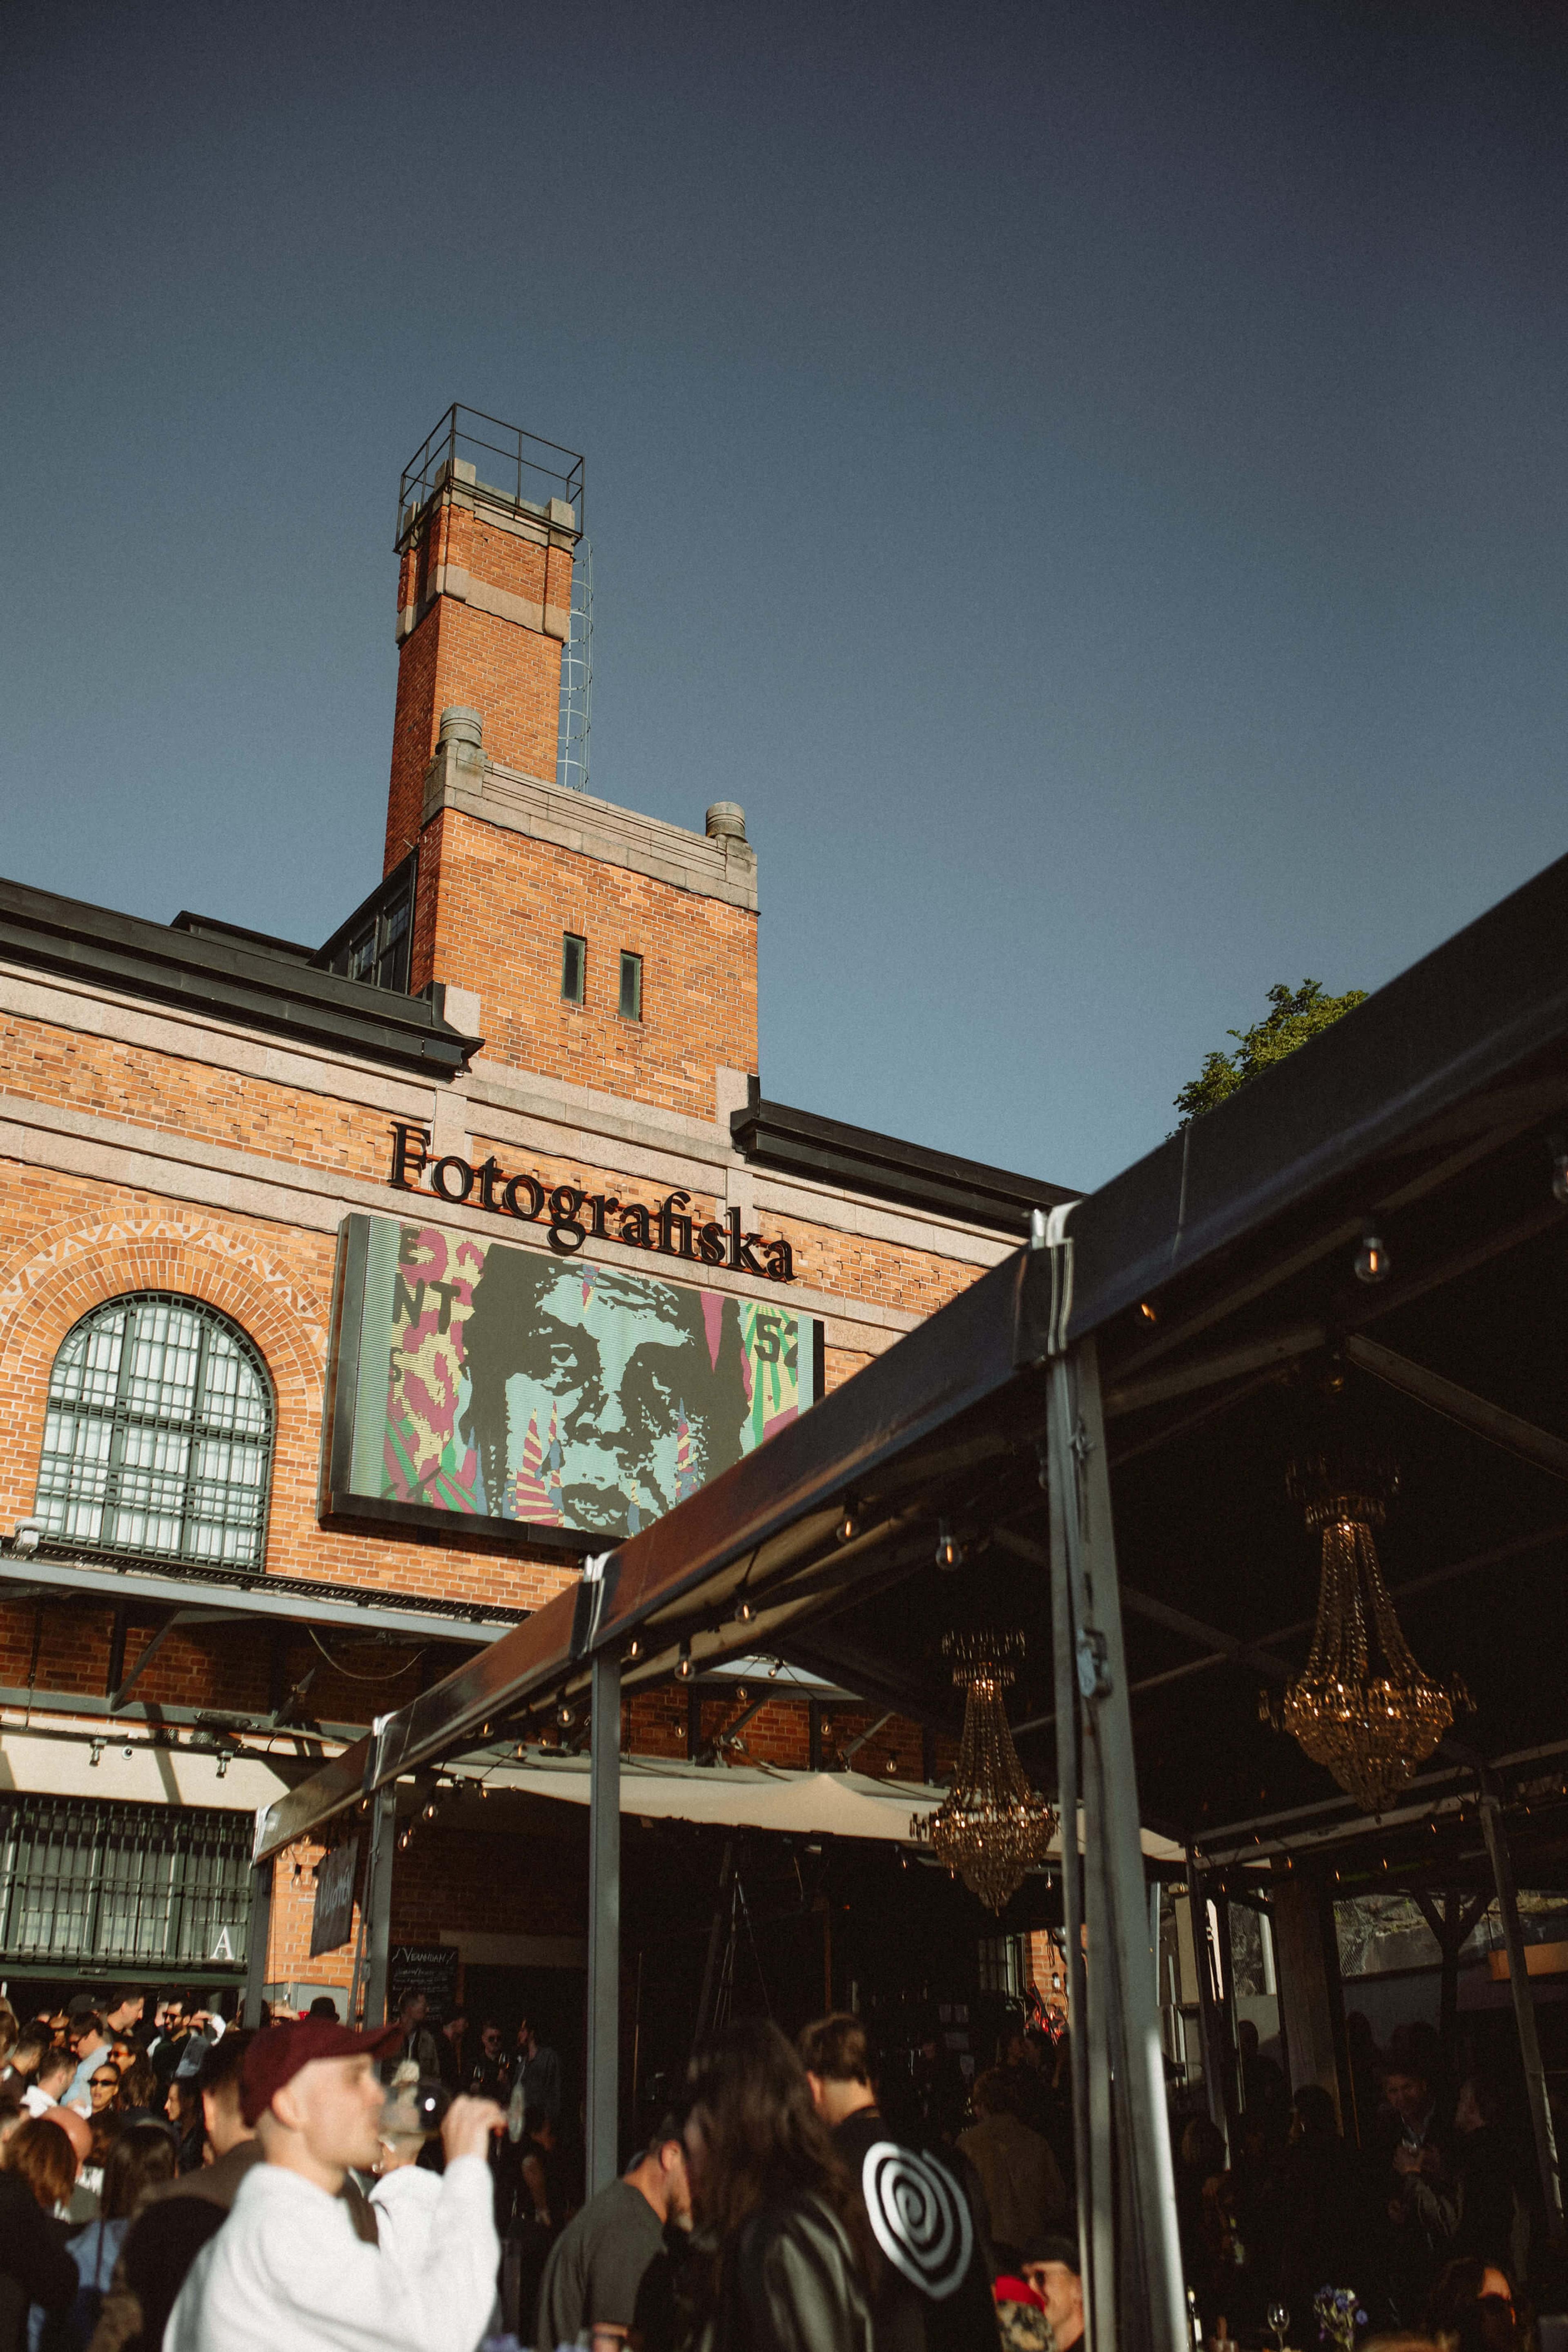 Fotografiska Stockholm exterior with view over the outdoor veranda where people are mingling